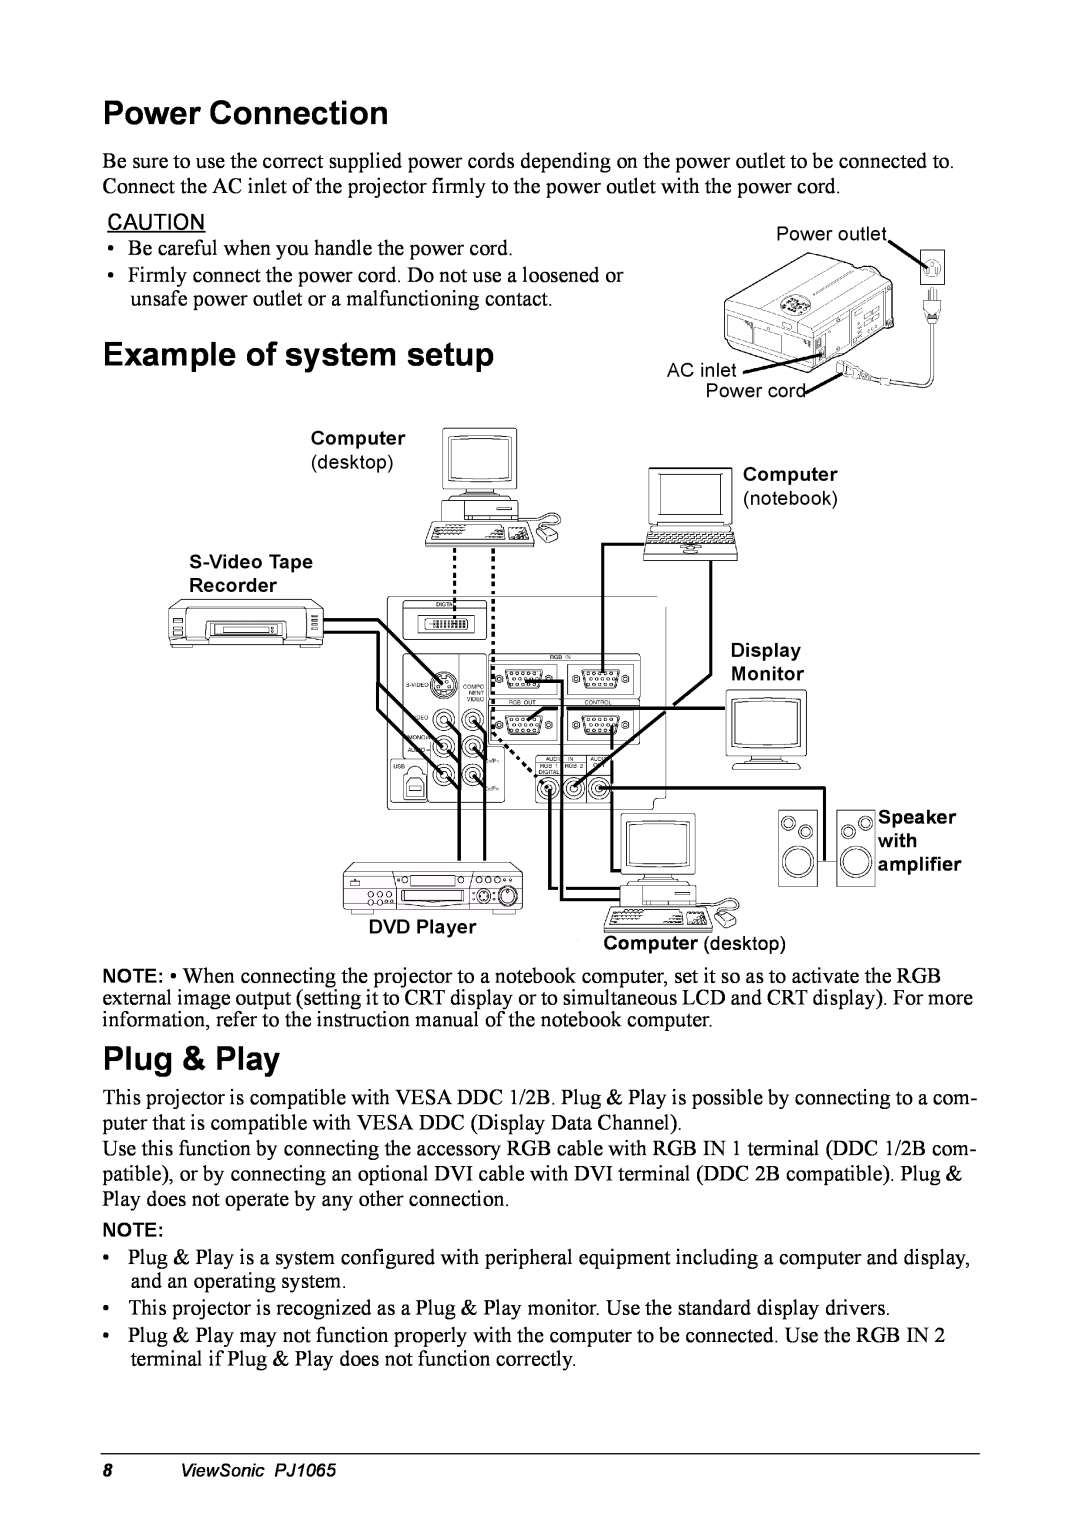 ViewSonic PJ1065 manual Power Connection, Example of system setup, Plug & Play 